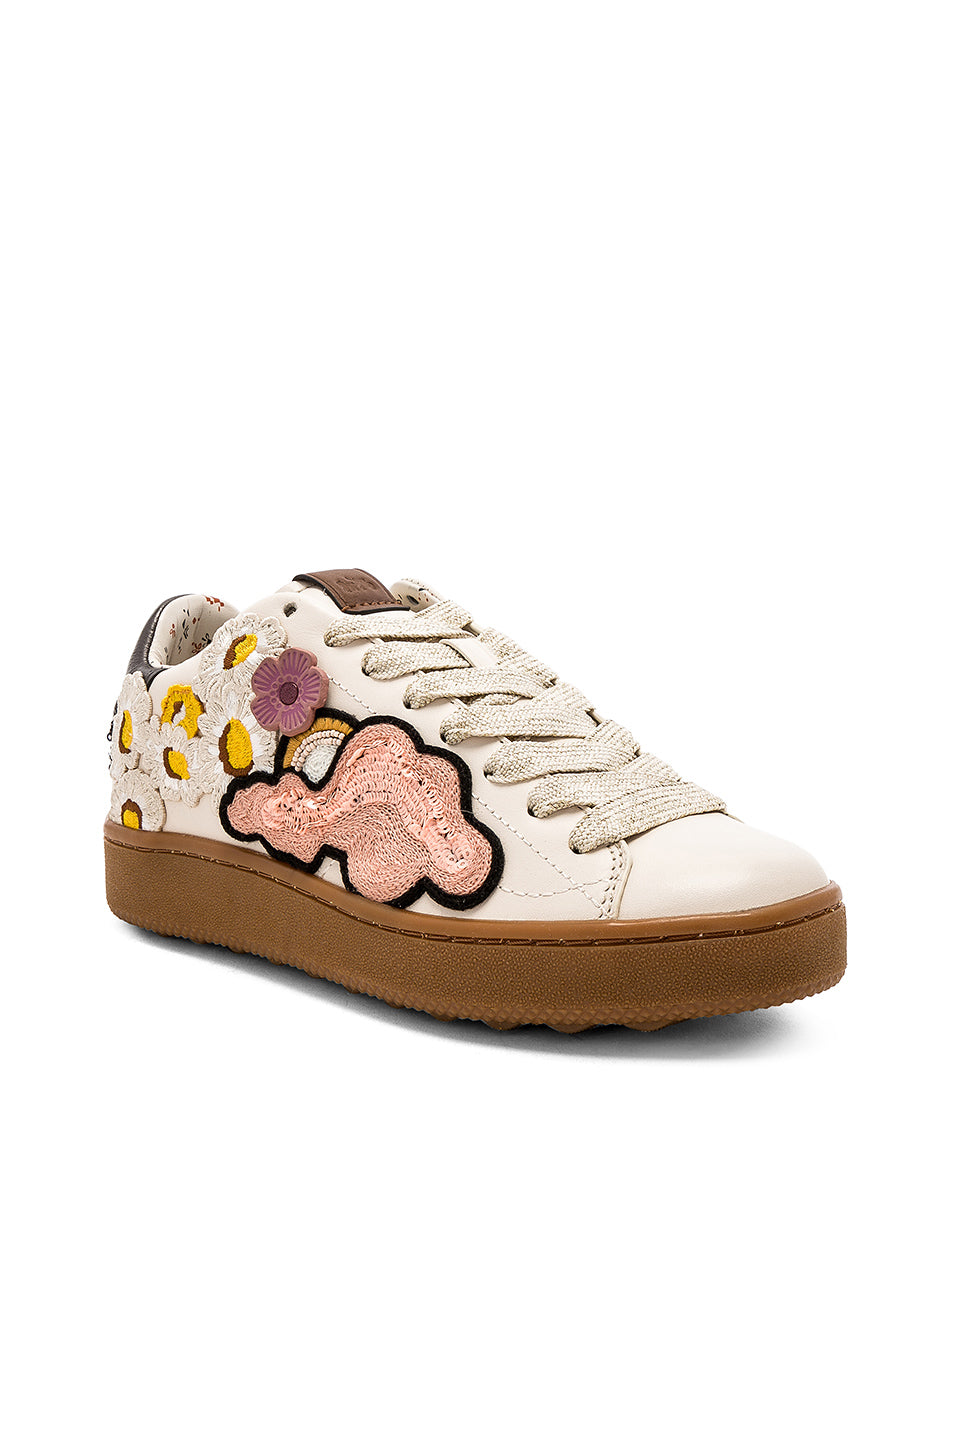 CLOUD PATCHES SNEAKER